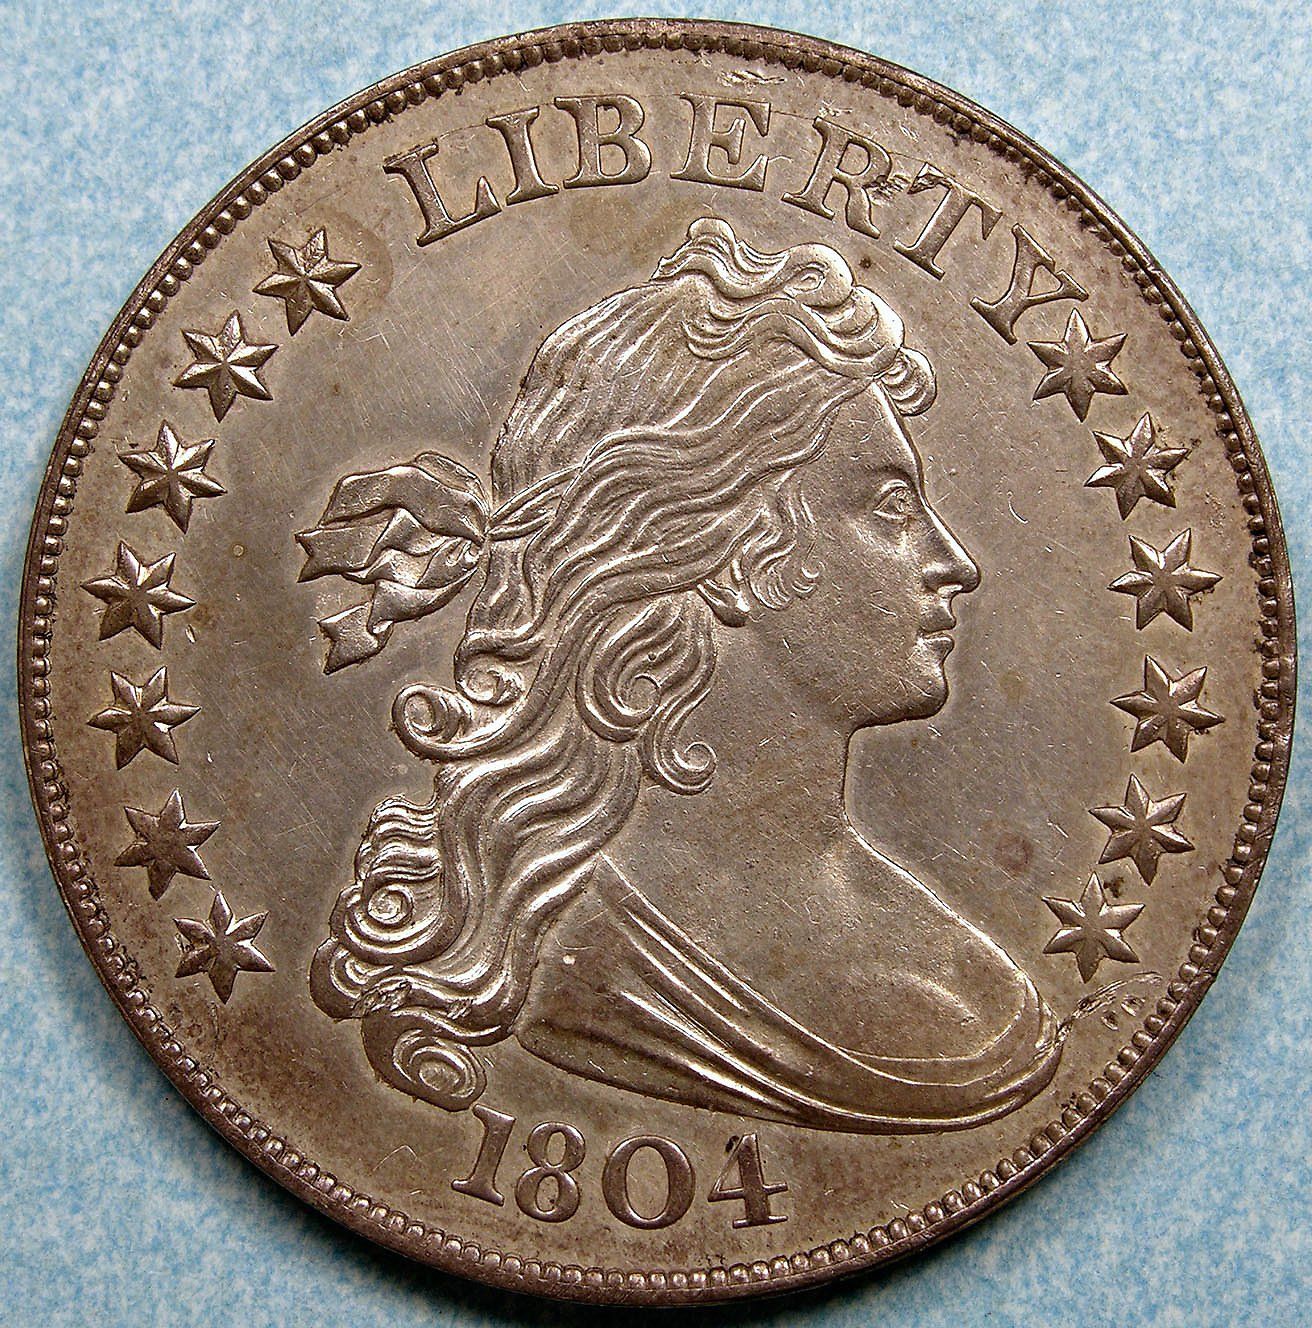 1804 Draped Bust Dollar - Image courtesy of the  National Numismatic Collection, National Museum of American History